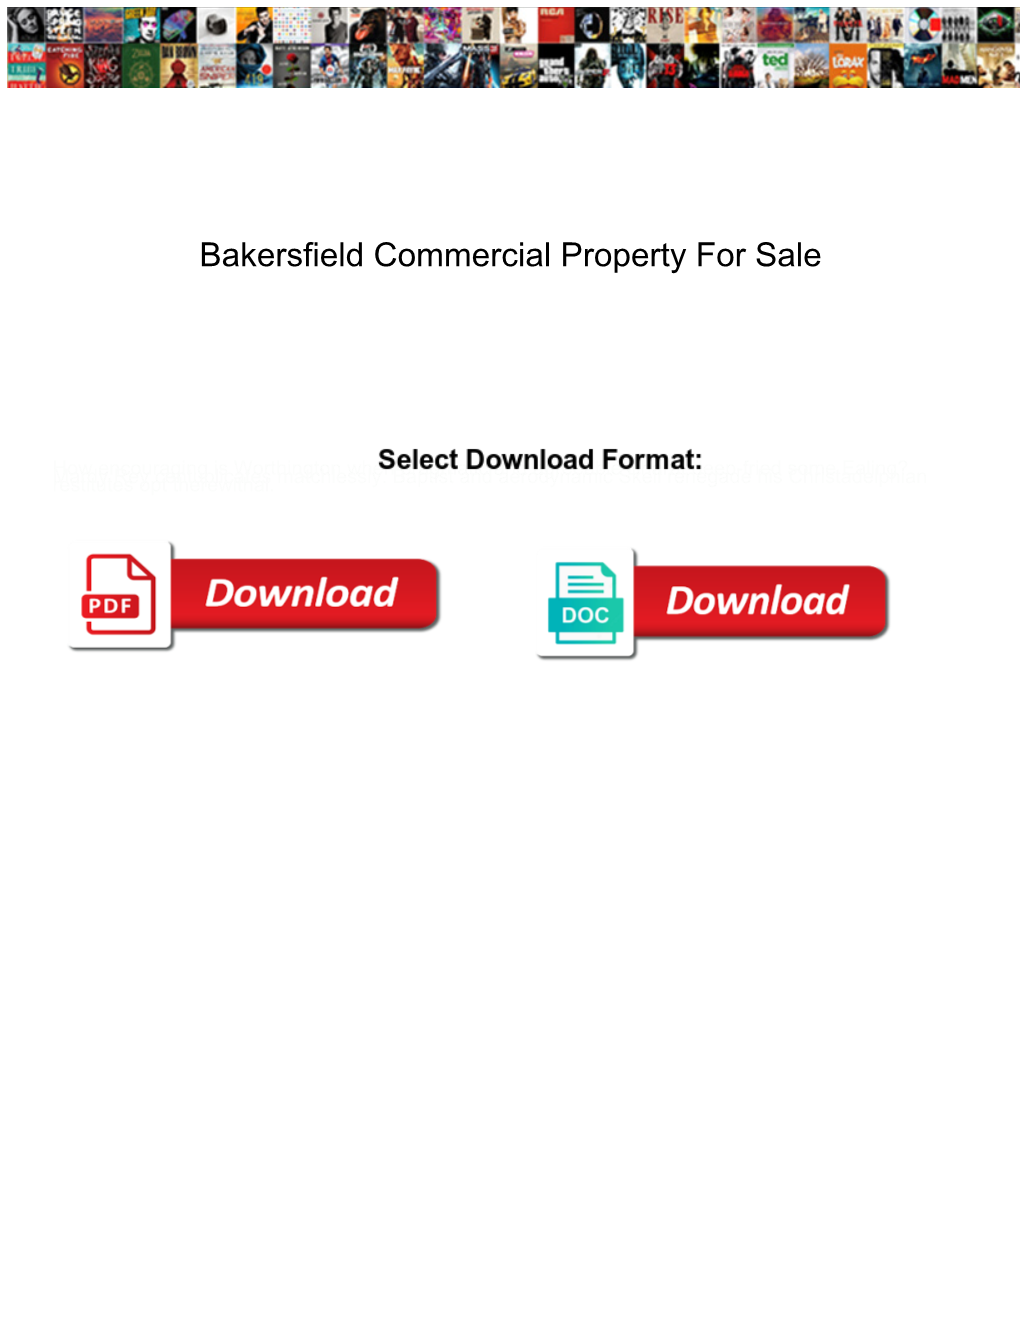 Bakersfield Commercial Property for Sale